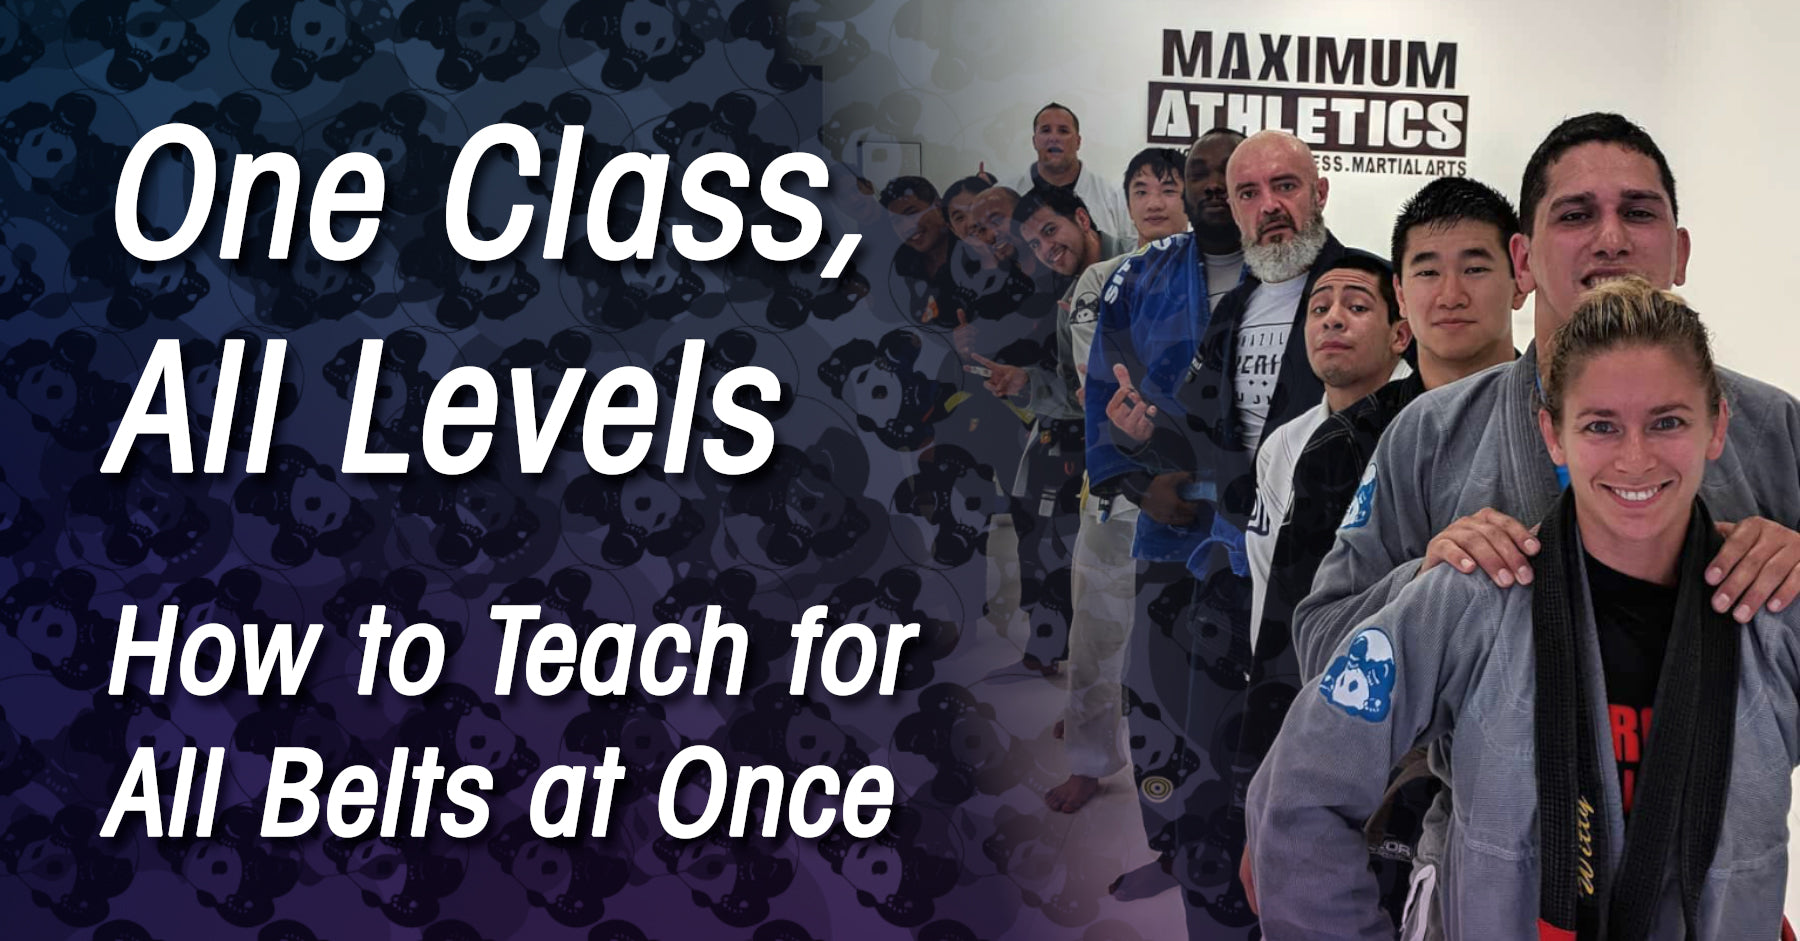 The Best Approach to an All-Levels Class